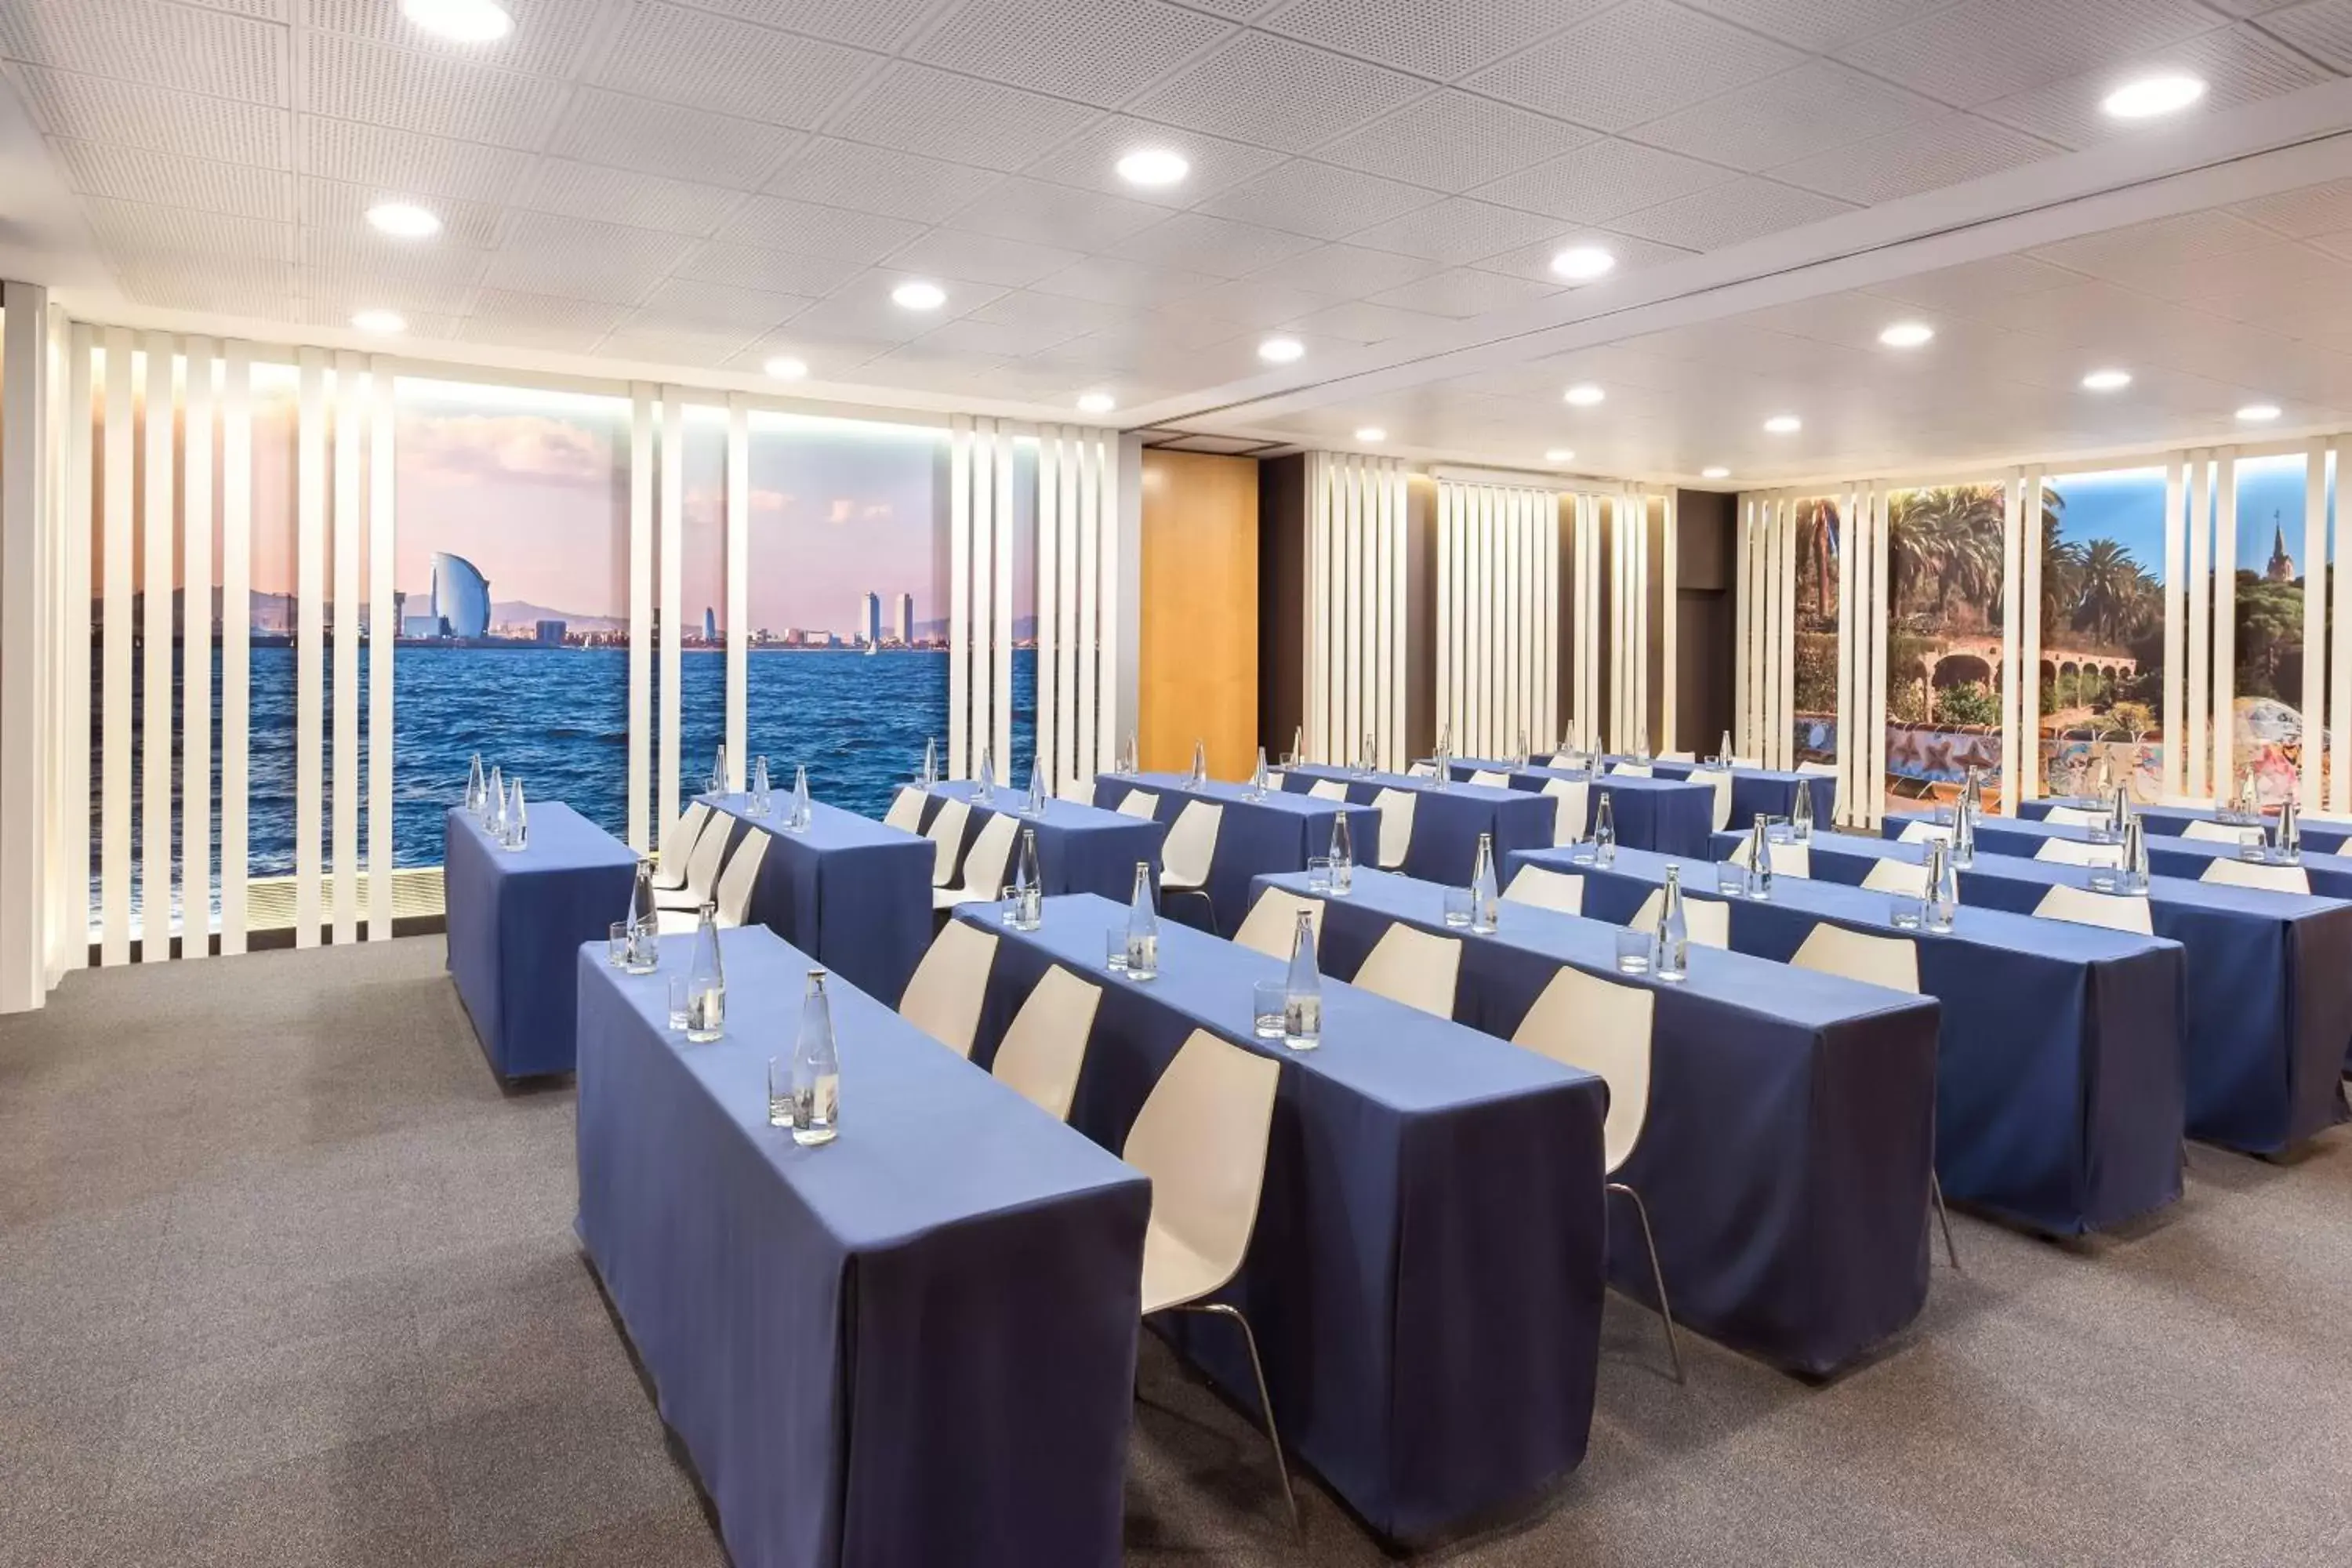 Meeting/conference room in Four Points by Sheraton Barcelona Diagonal